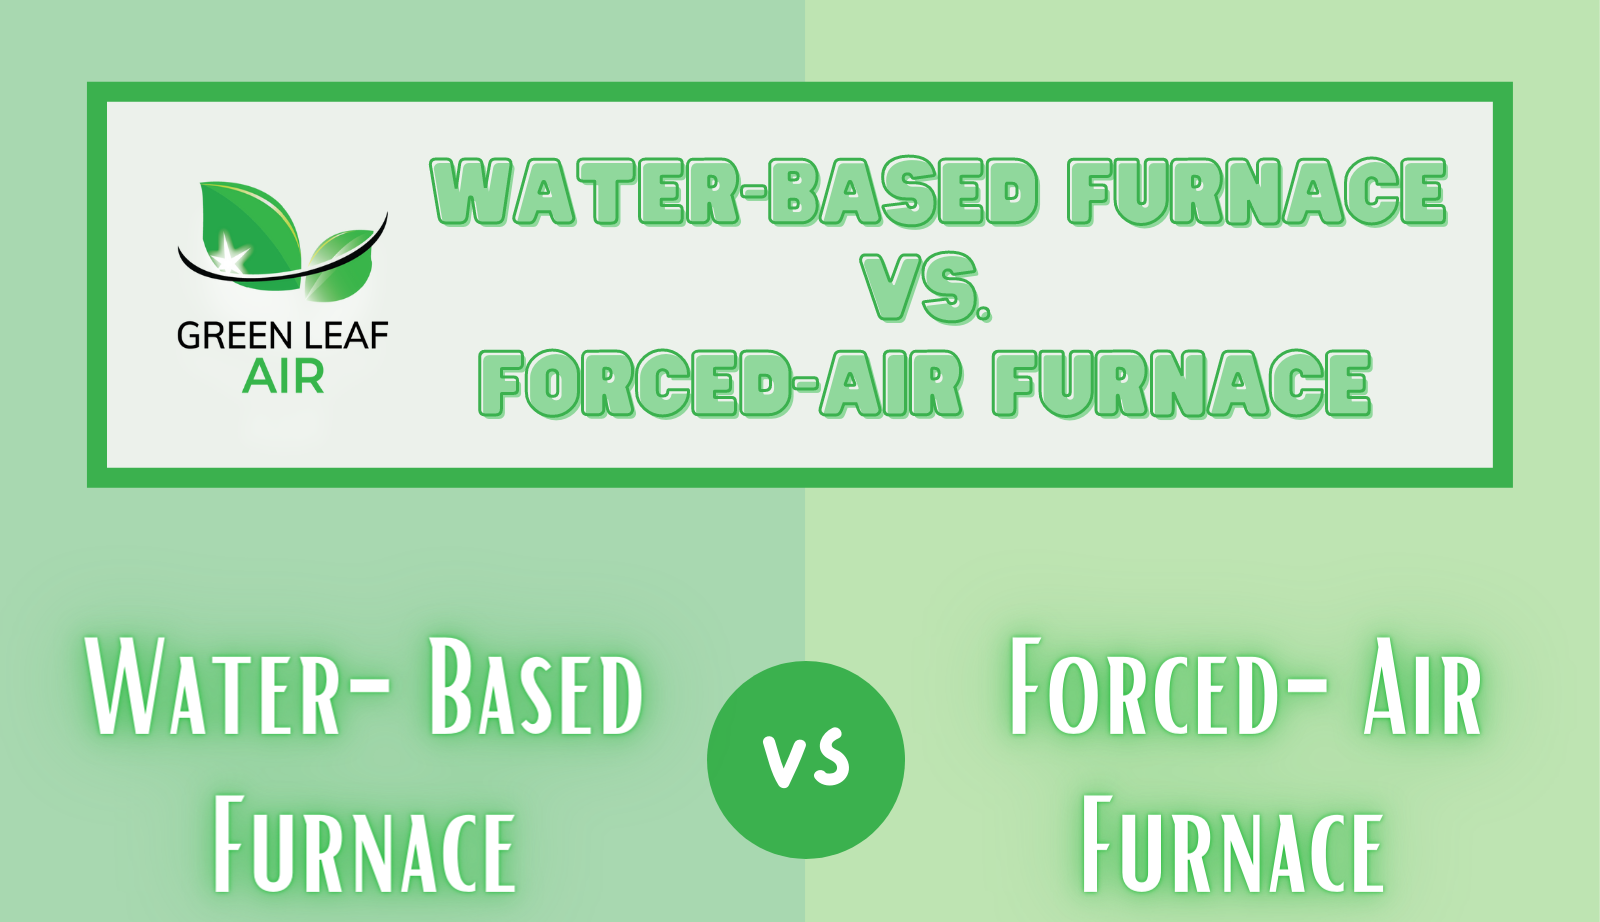 Water-Based Furnace vs. Forced-Air Furnace